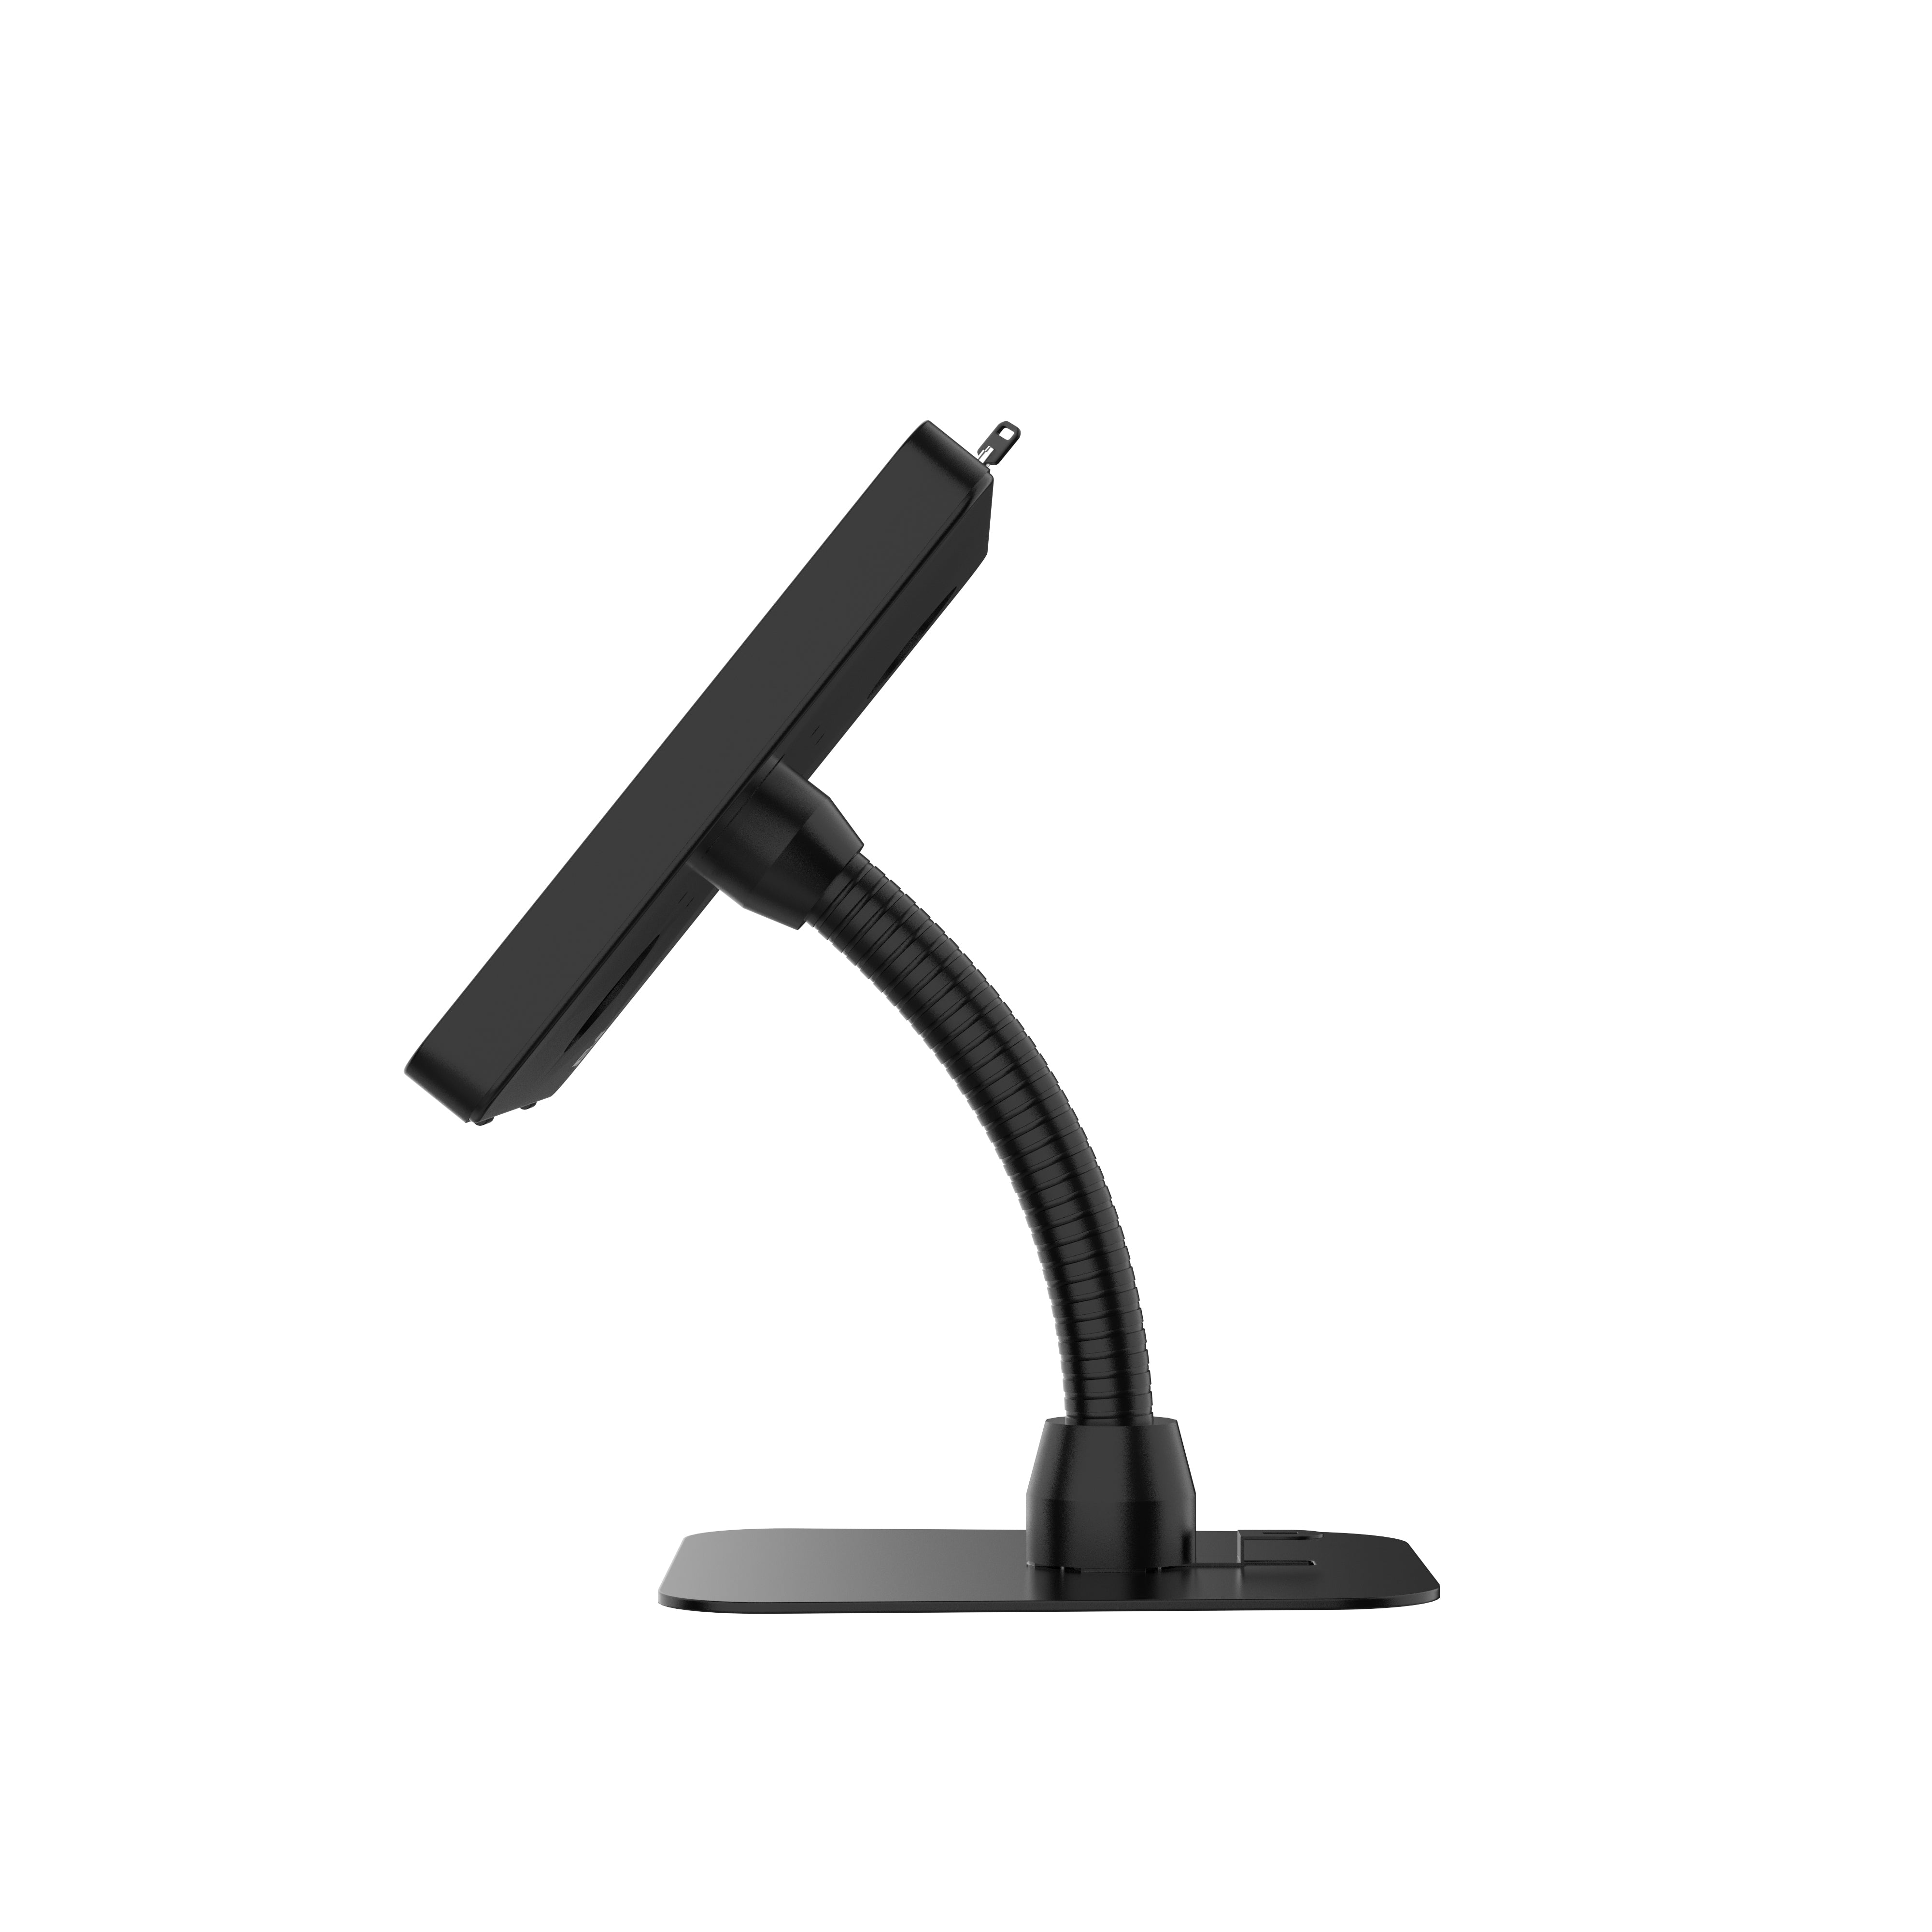 Premium Security Gooseneck Tabletop Mount for 11-inch iPad Air M2/ Pro M4 (2024), iPad 10.2-inch (7th & 8th Gen.), iPad Gen. 5 & 6 and more